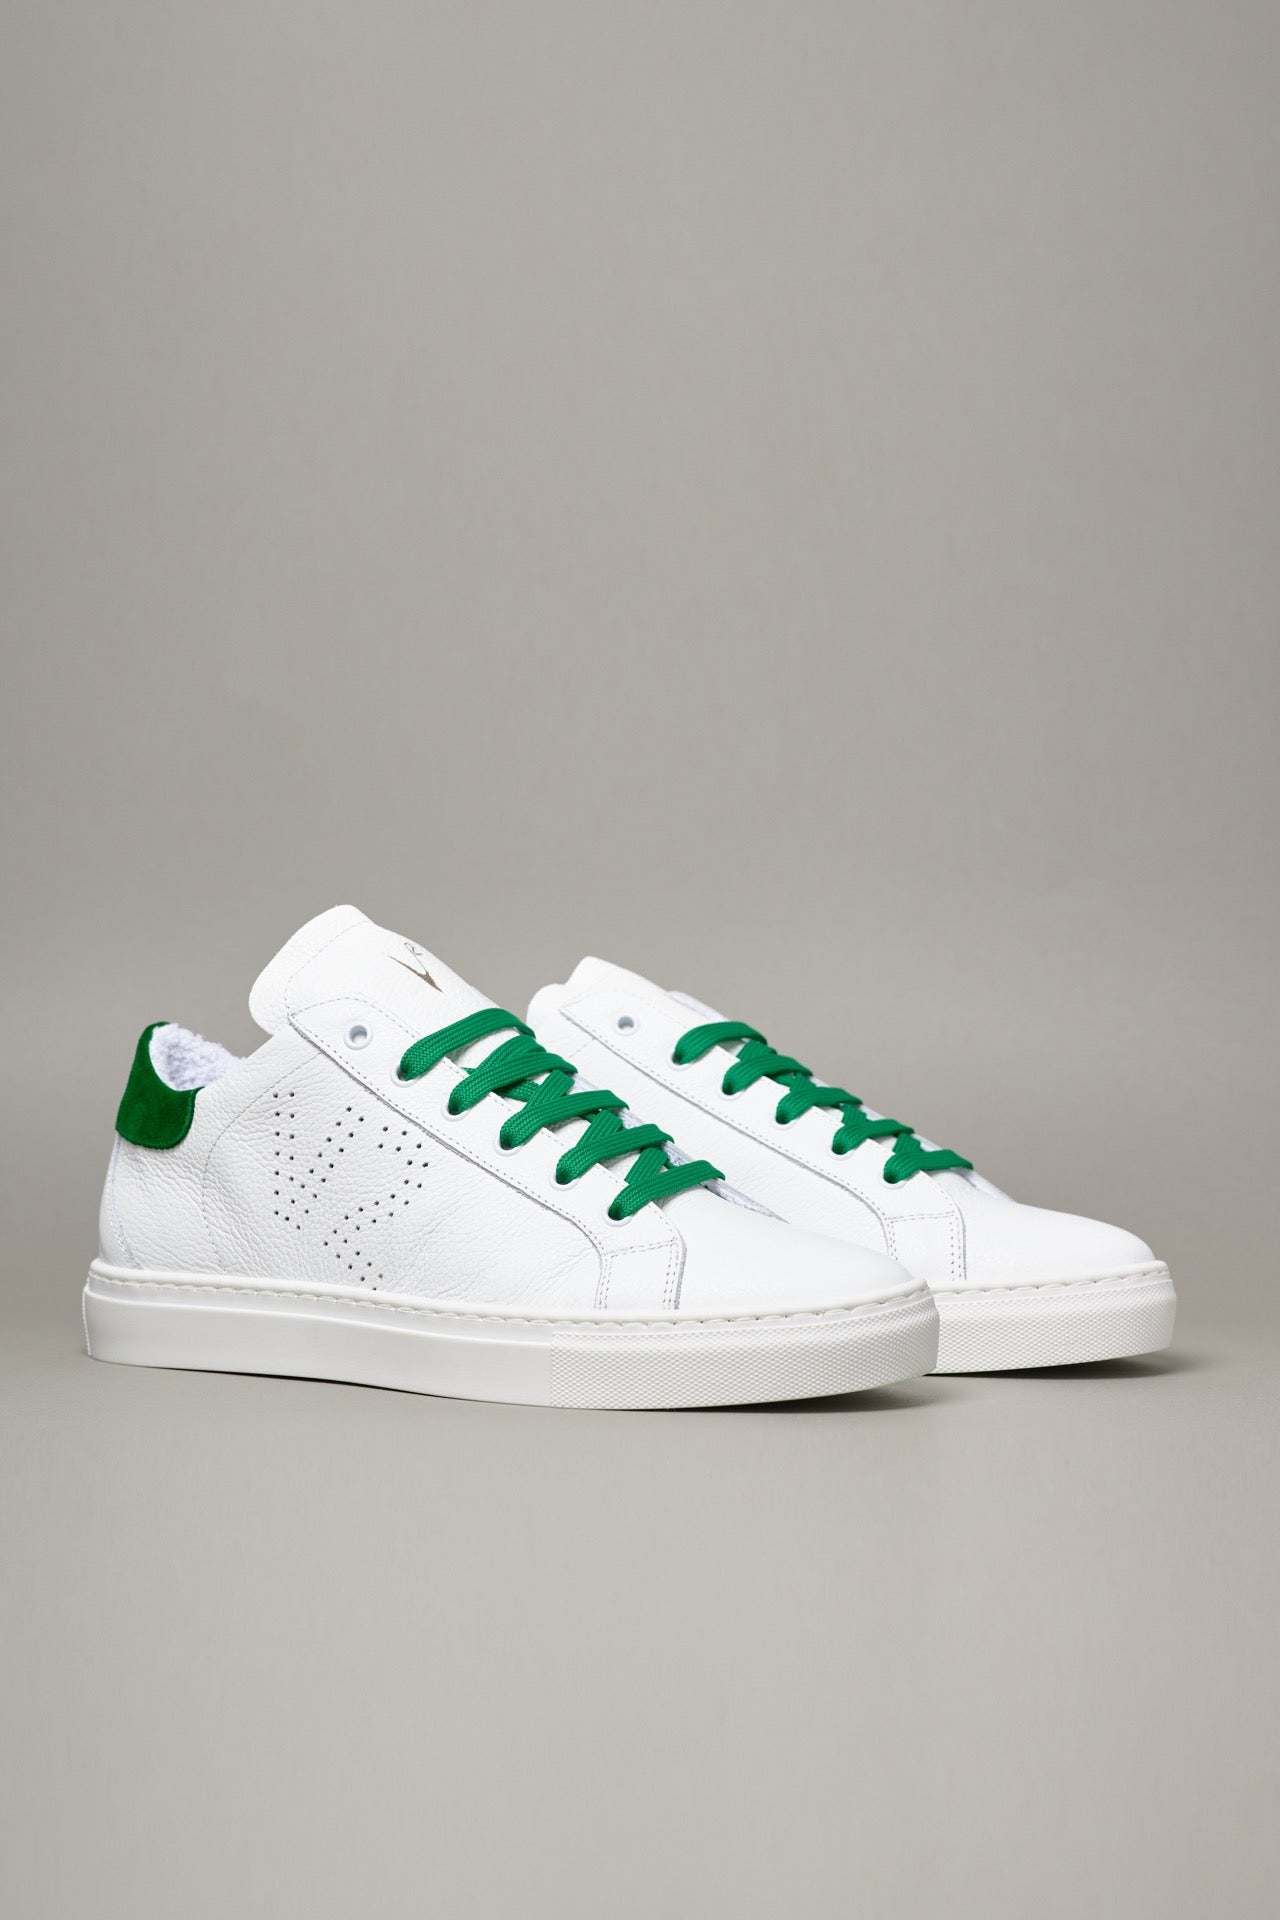 TENNIS - White low sole sneakers with Green back and laces